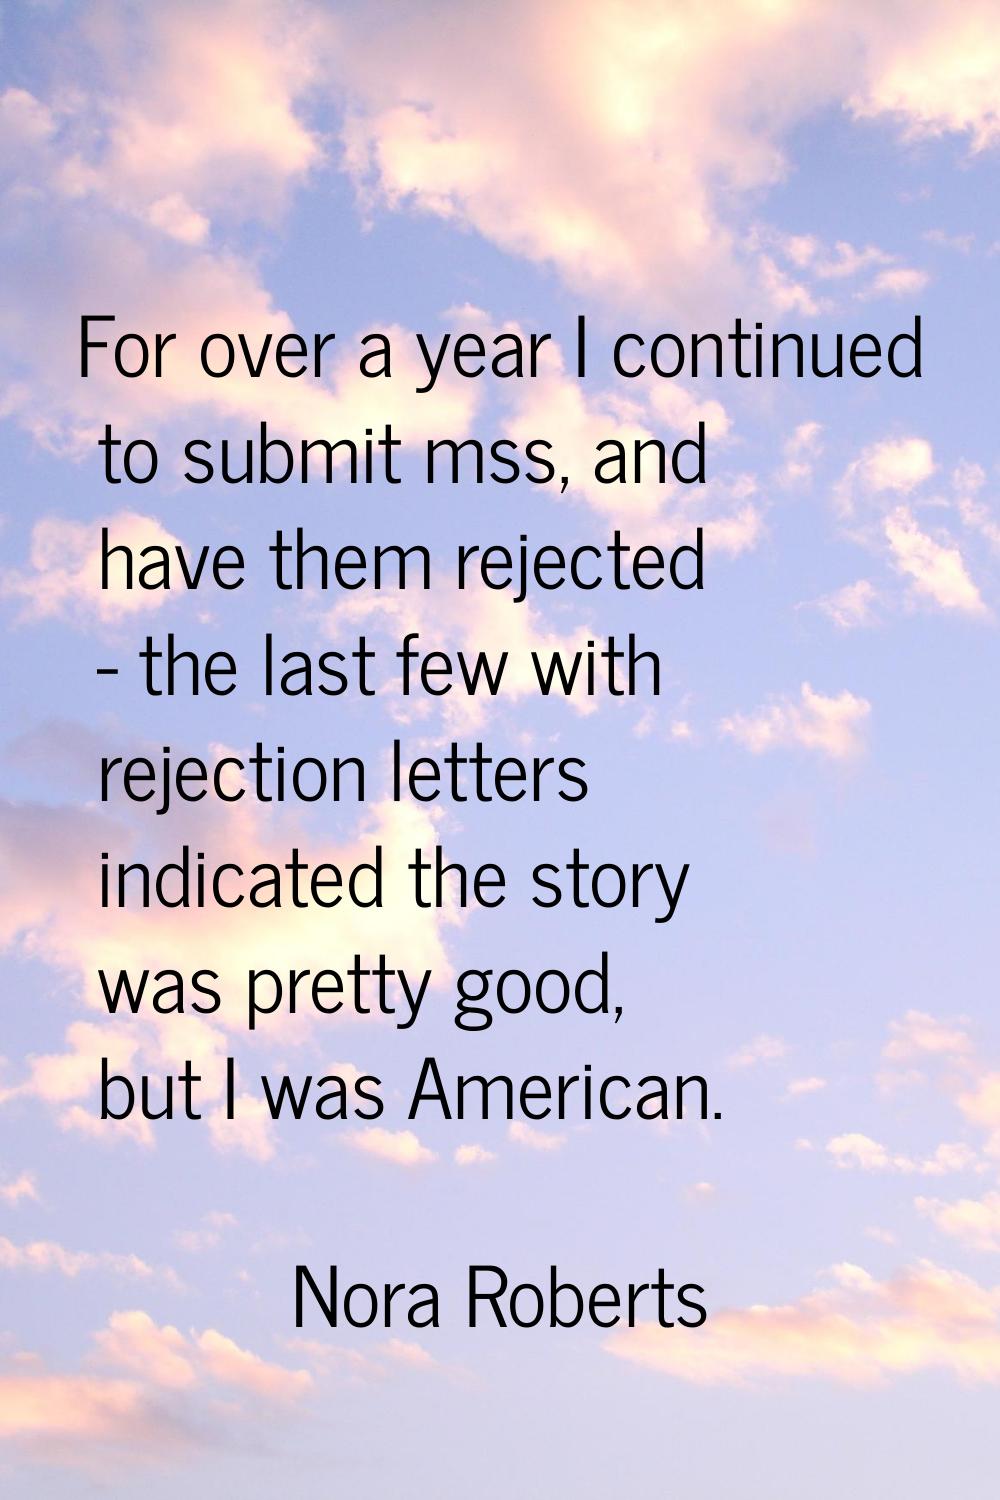 For over a year I continued to submit mss, and have them rejected - the last few with rejection let